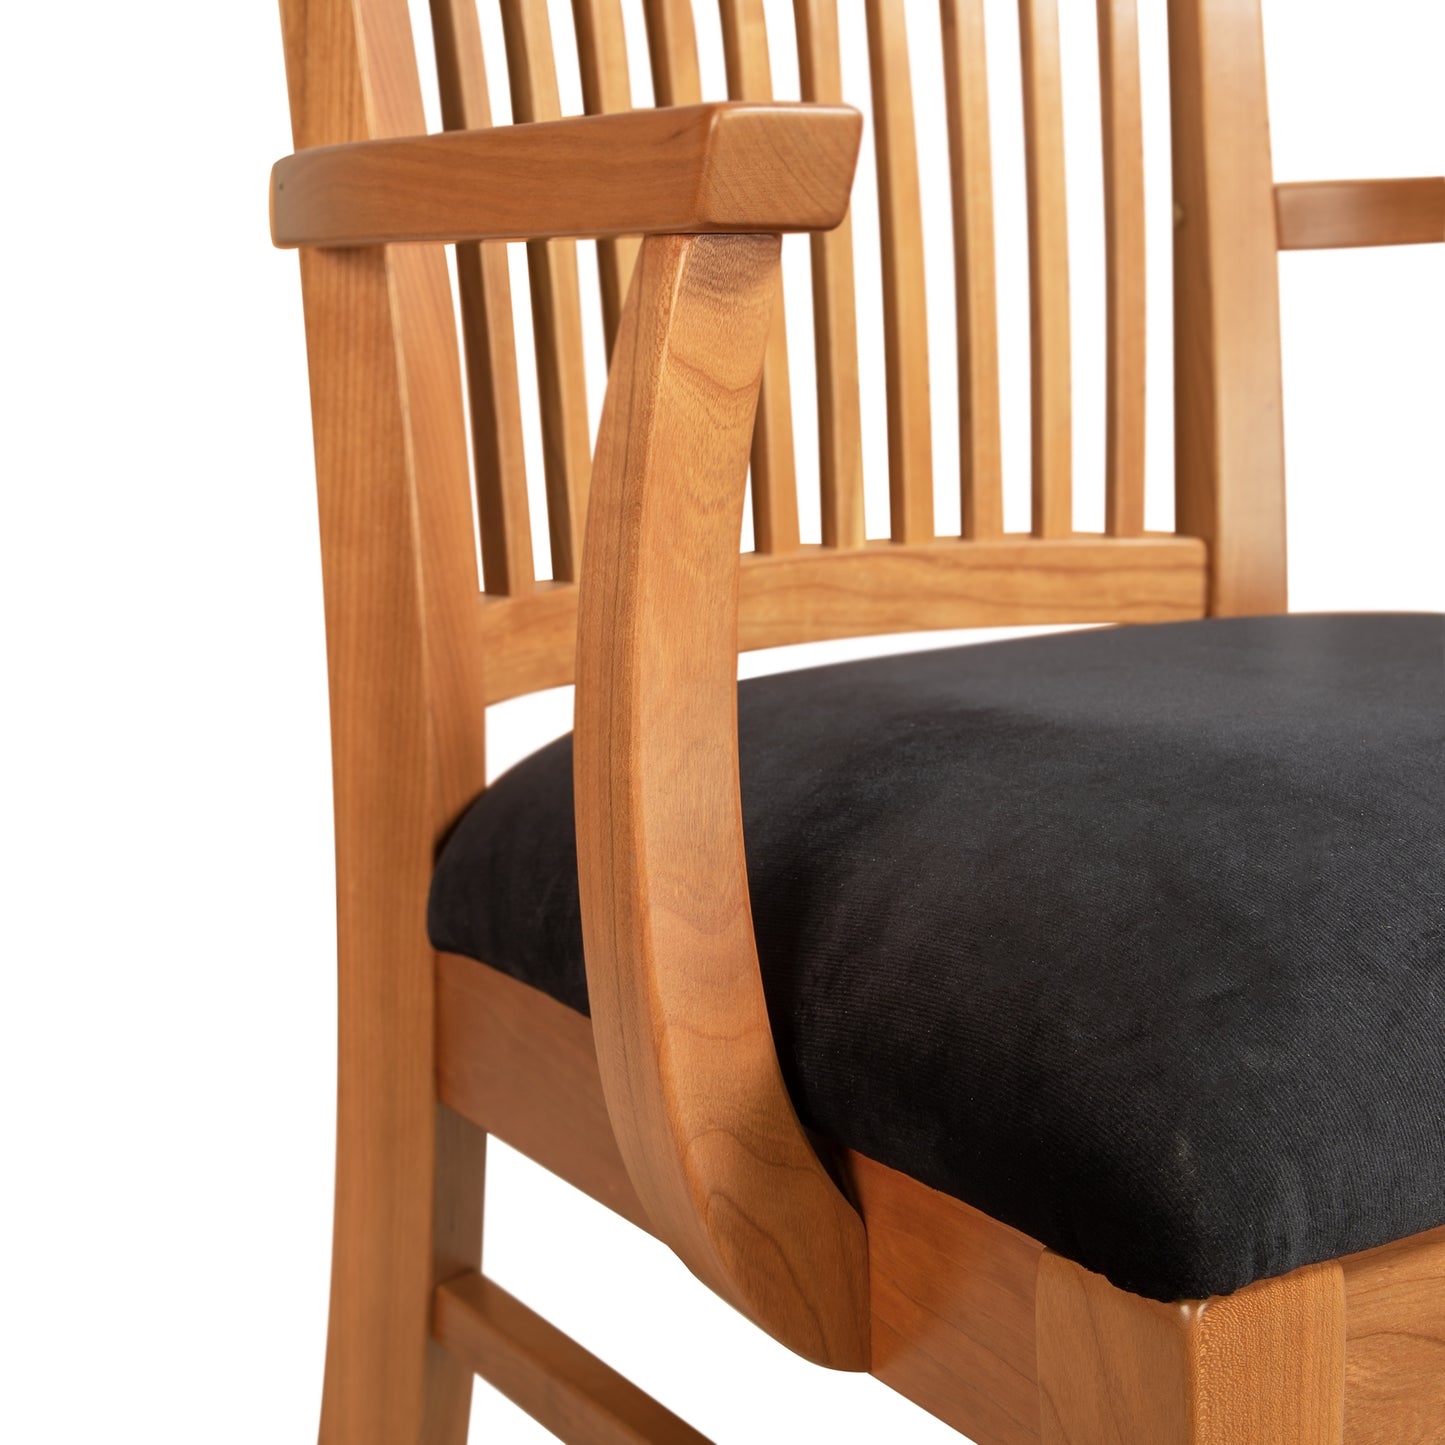 A wooden chair with a black cushion.